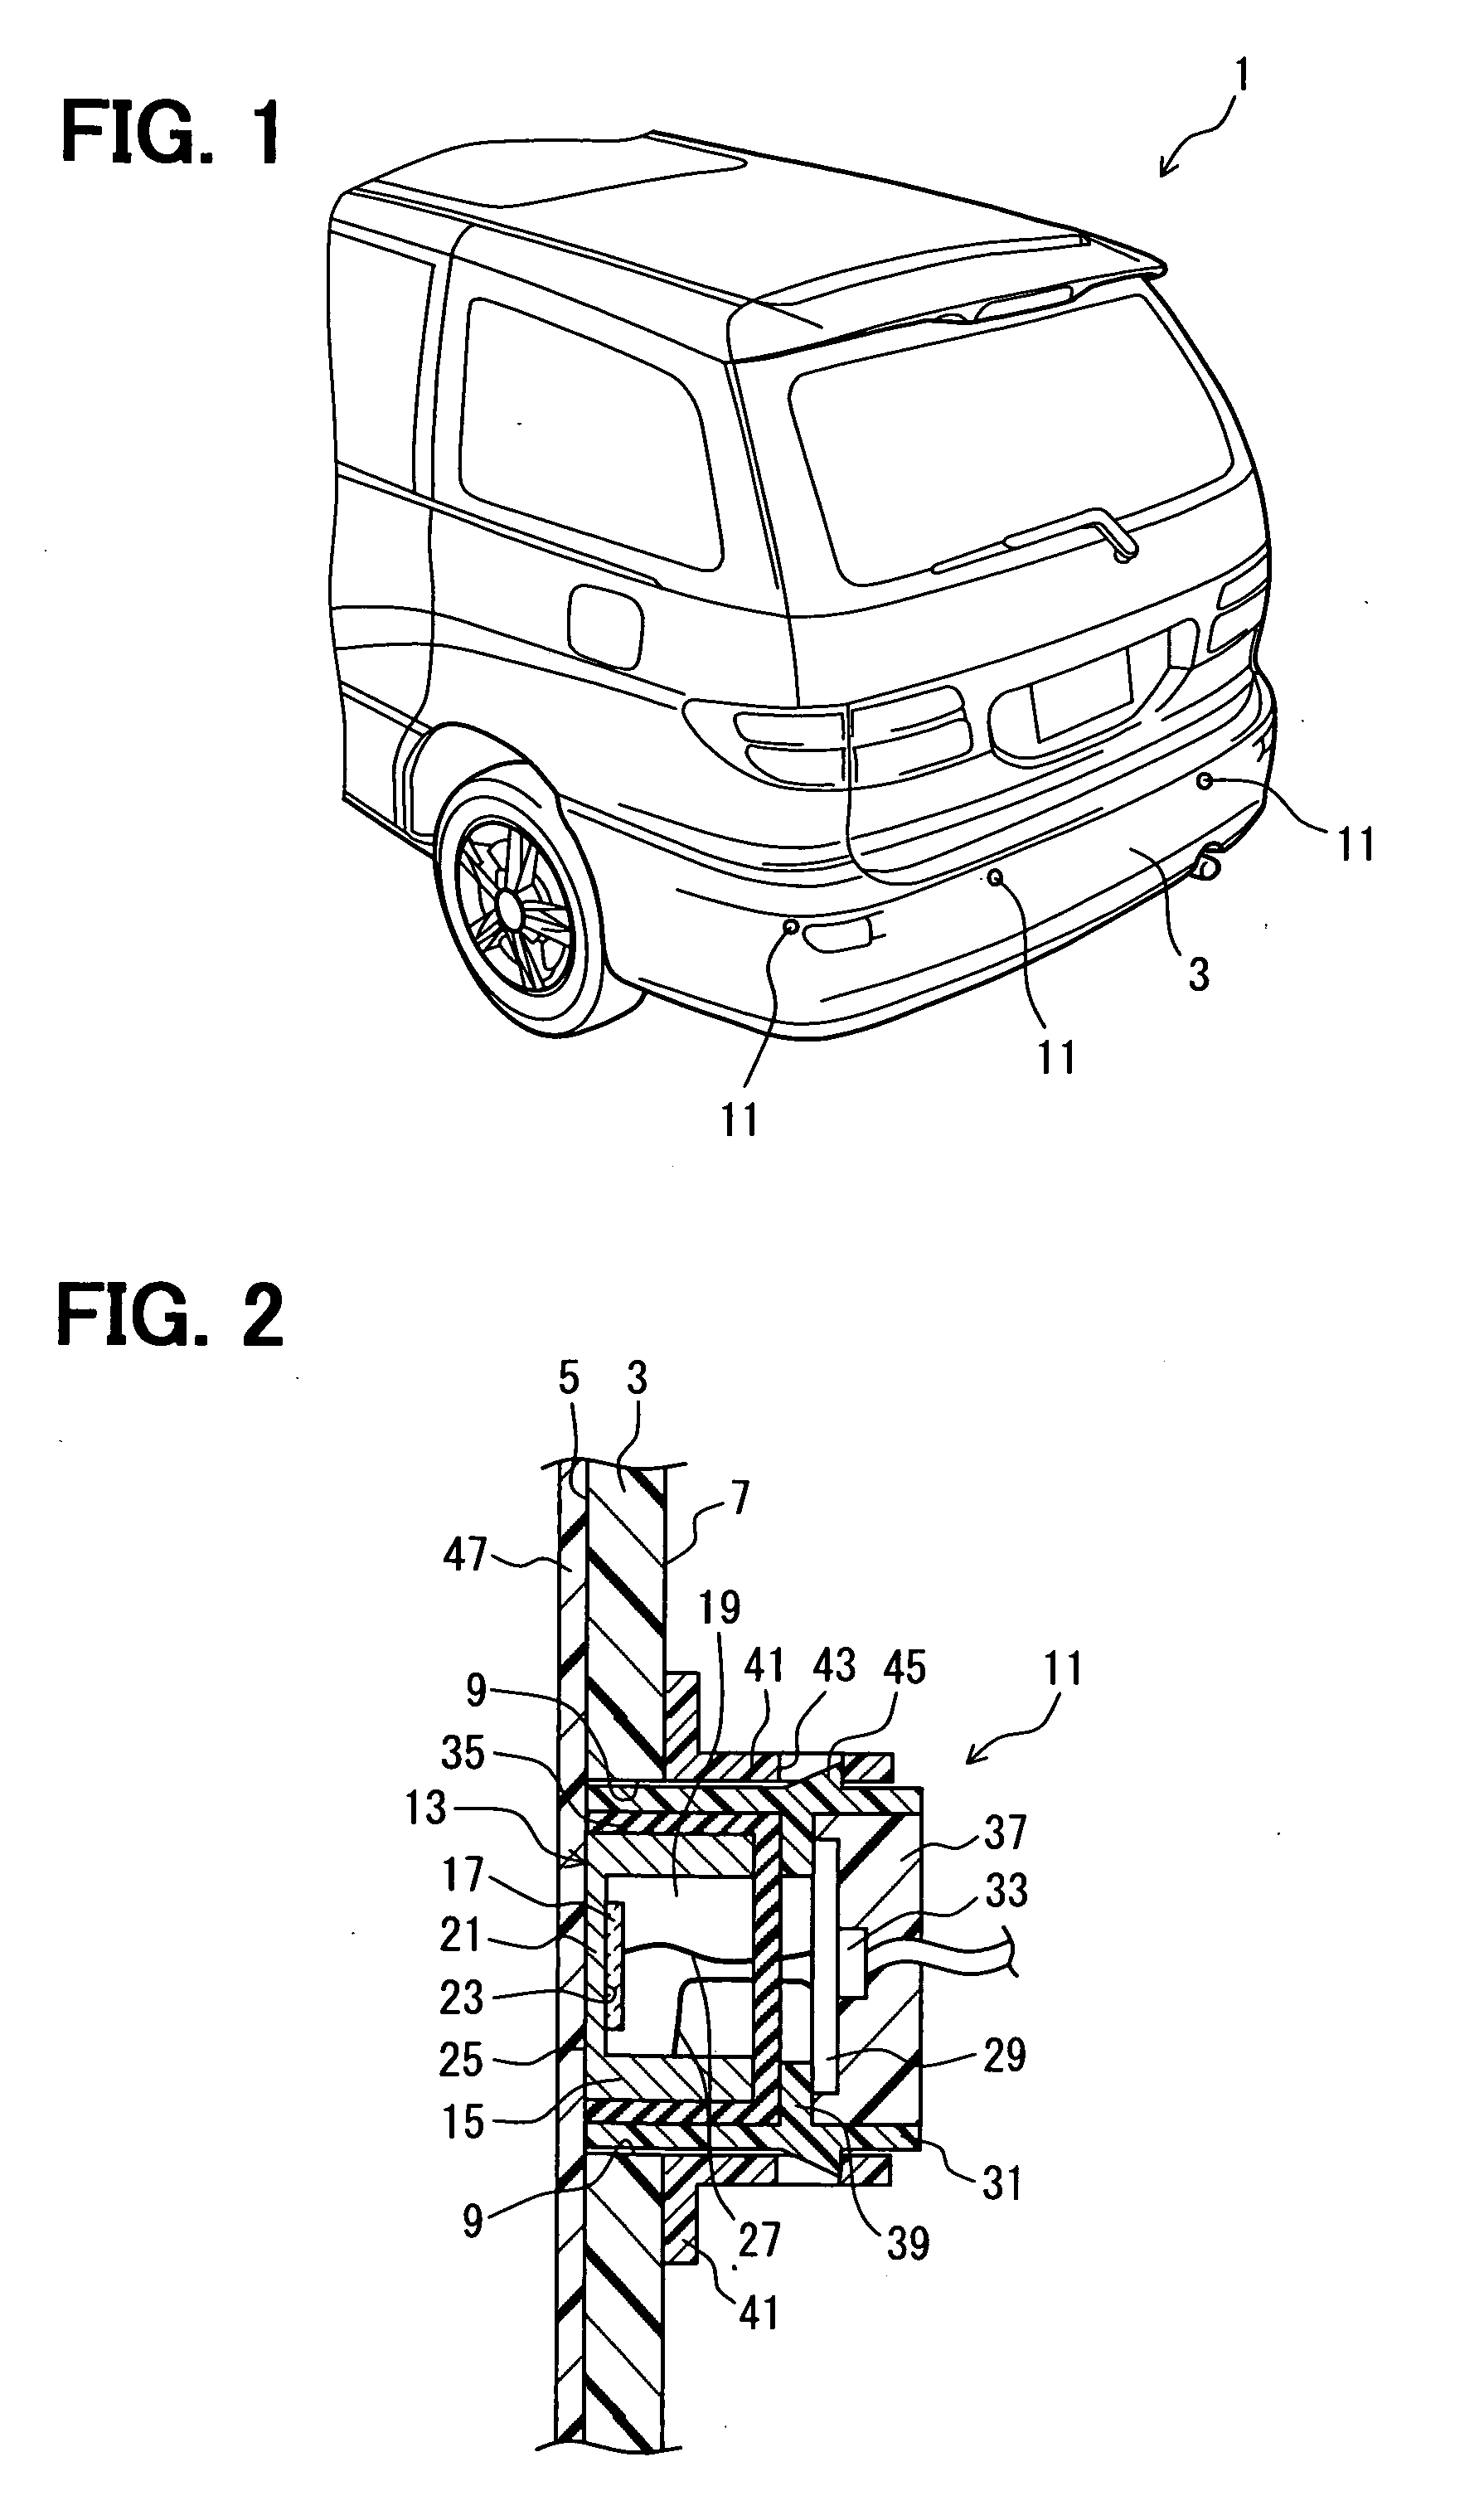 Mount structure for sensor device